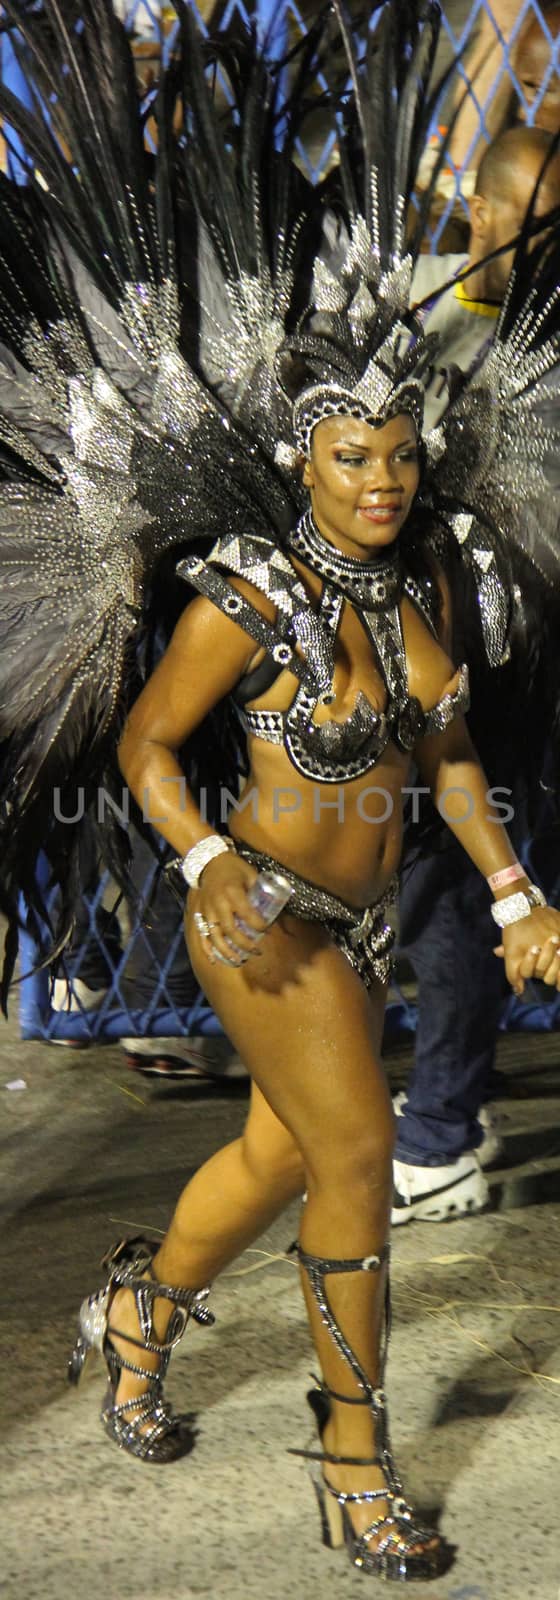 An entertainer at a carnaval in Rio de Janiero, Brazil
03 Mar 2014
No model release
Editorial only